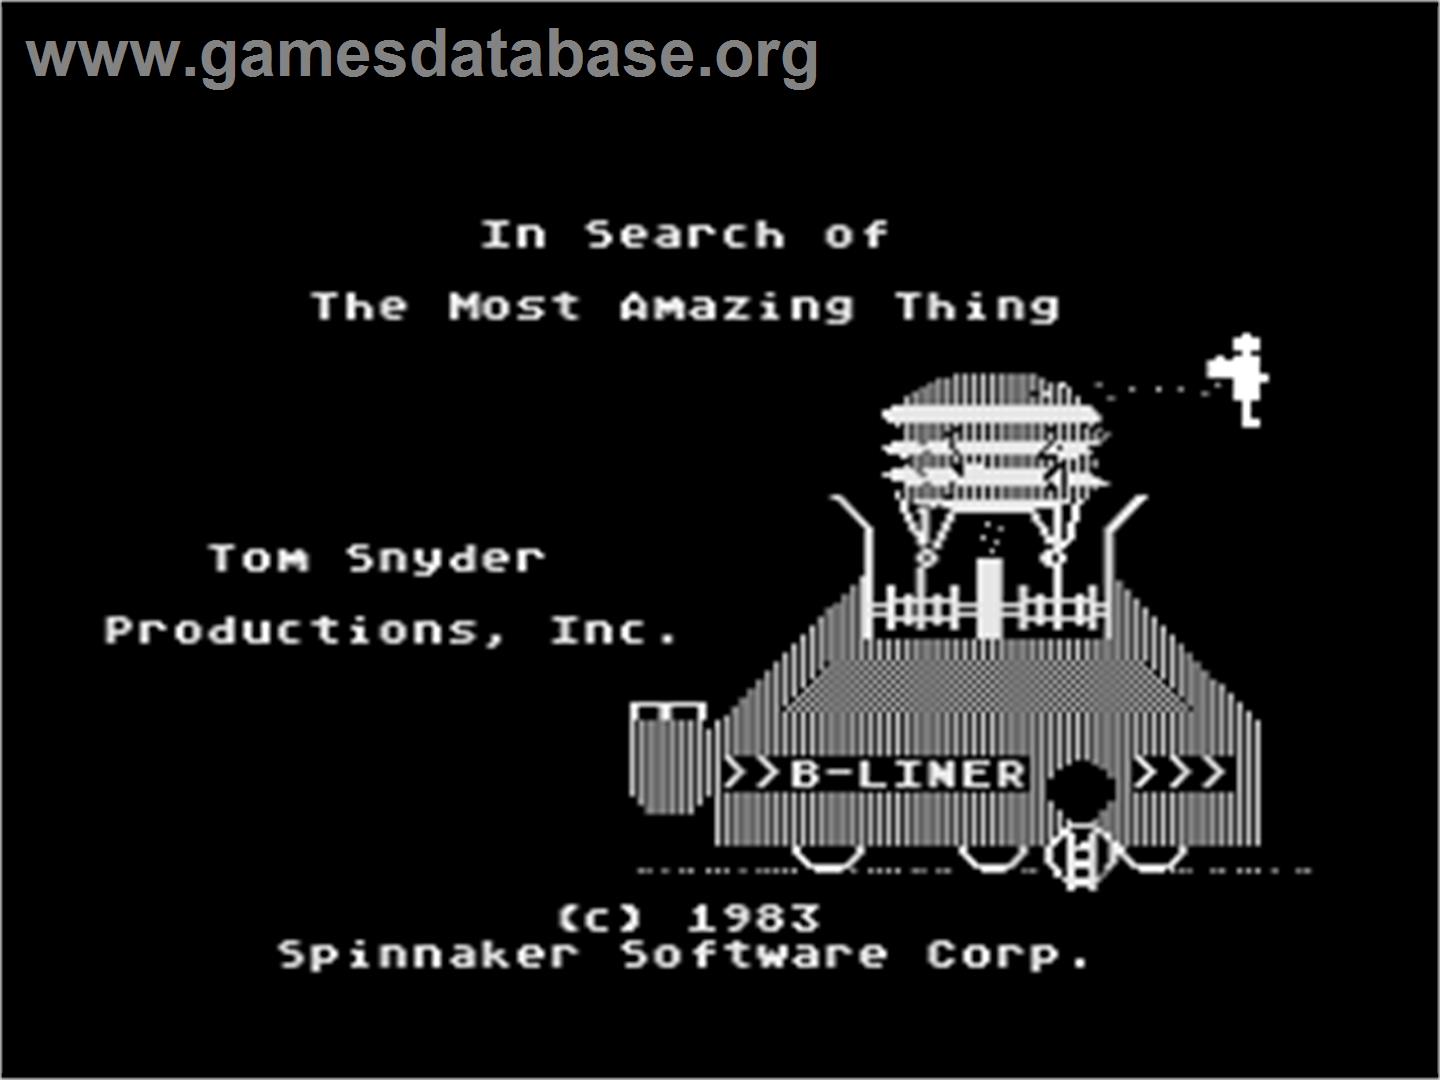 In Search of the Most Amazing Thing - Atari 8-bit - Artwork - Title Screen